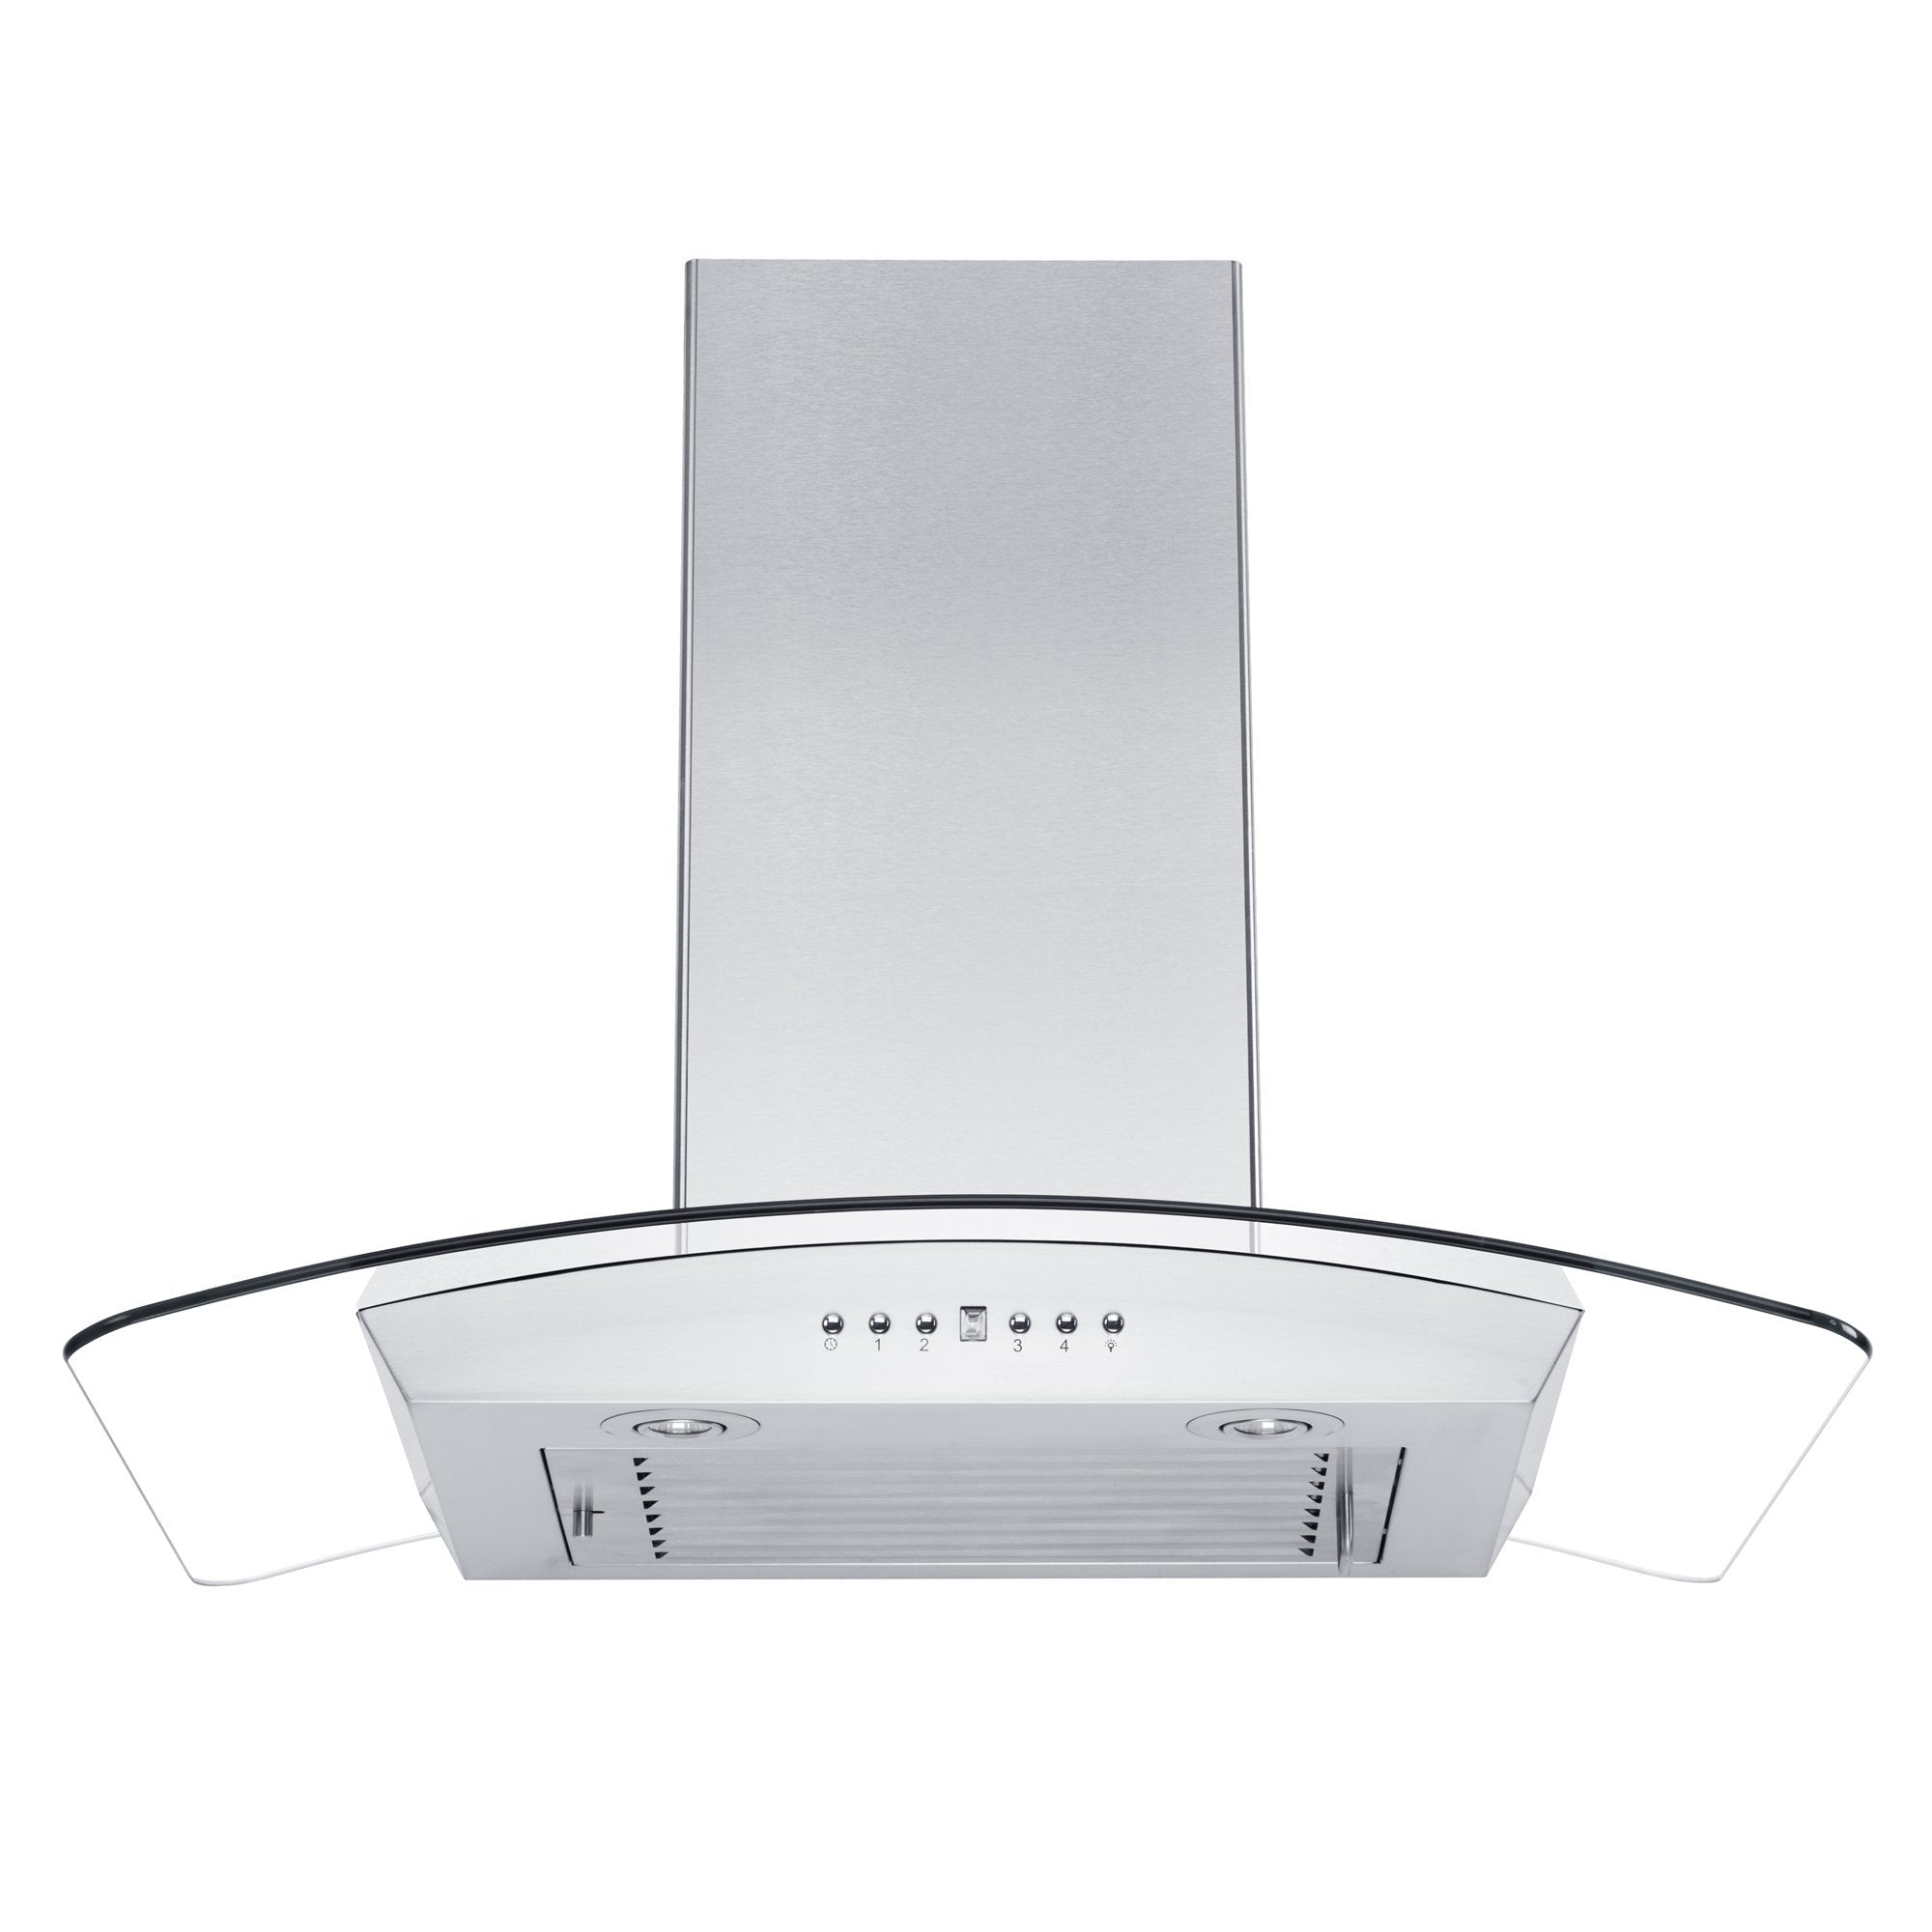 ZLINE 36" Convertible Vent Wall Mount Range Hood in Stainless Steel & Glass with Crown Molding (KZCRN-36)